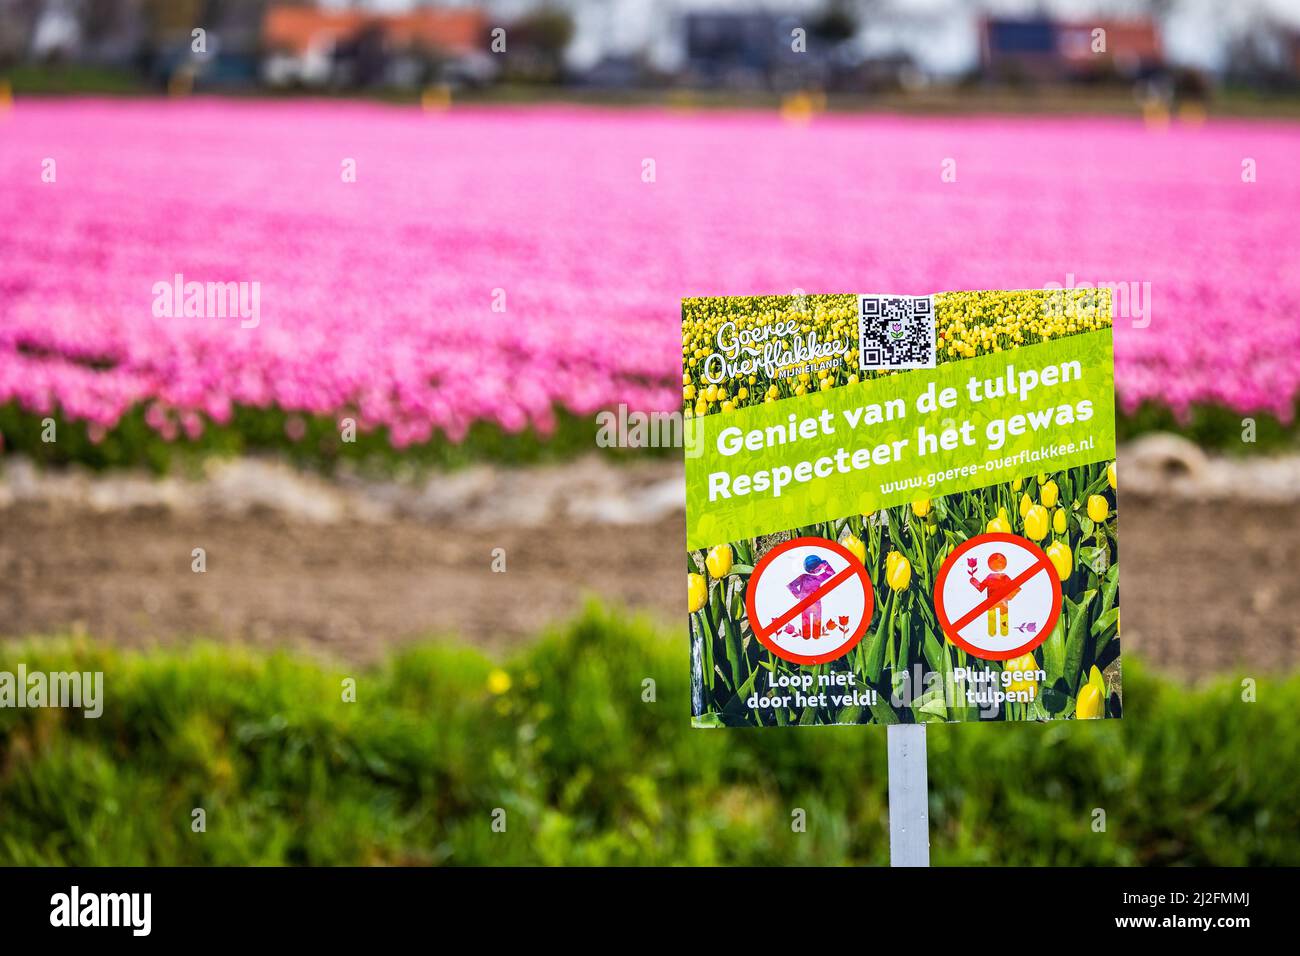 2022-03-31 08:06:58 31-03-2022, Zuid-Beijerland - Tulip fields in bloom on a field in Zuid-Beijerland. The tulips bloom early this year due to the beautiful sunny weather. Photo: ANP / Hollandse Hoogte / Jeffrey Groeneweg netherlands out - belgium out Stock Photo